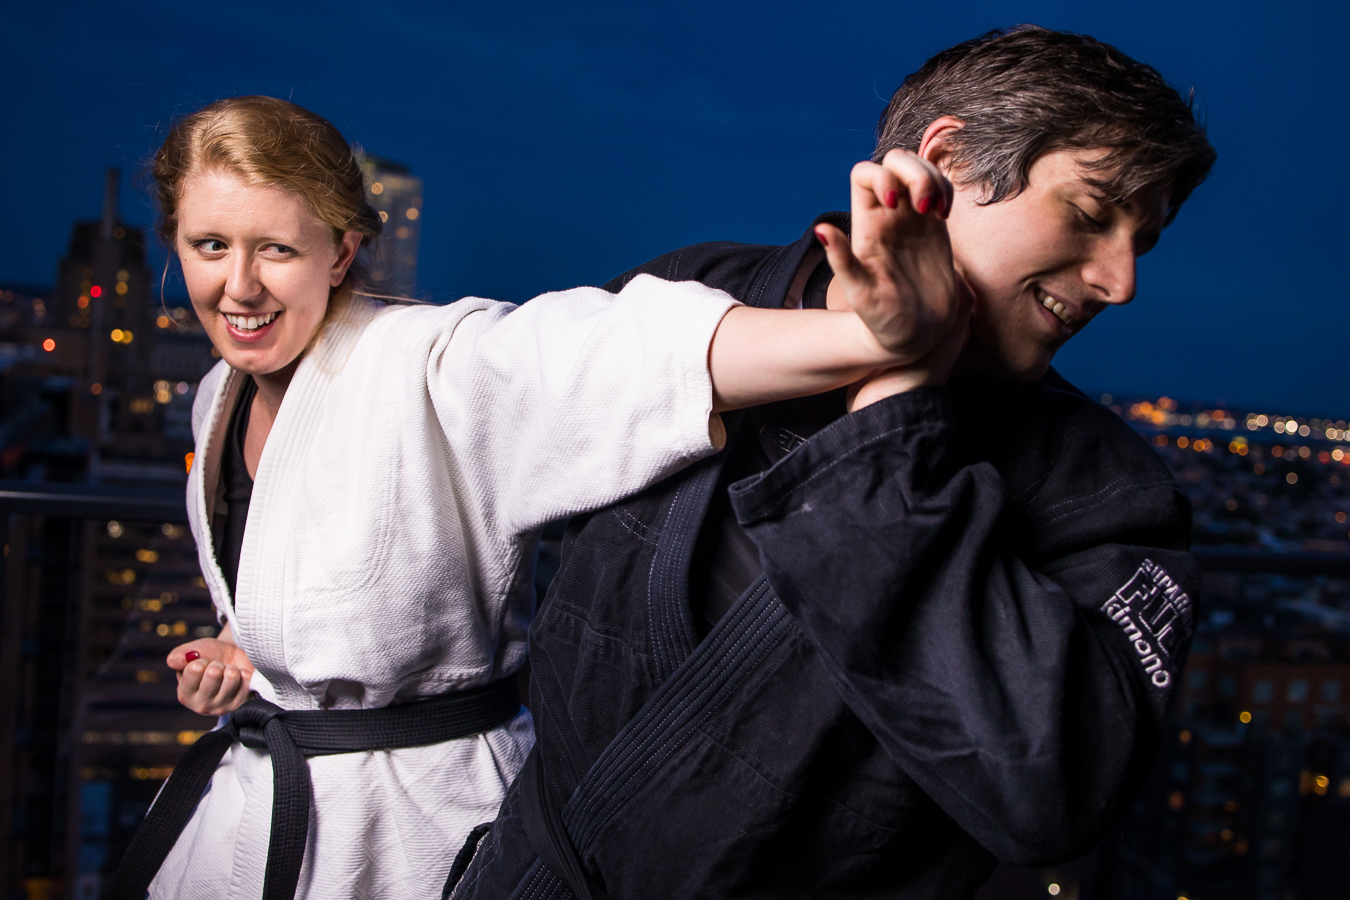 authentic engagement photographer, rhinehart photography, captures this image of the couple as they do jiu-jitsu together on the rooftop of their apartment in center city Philadelphia 